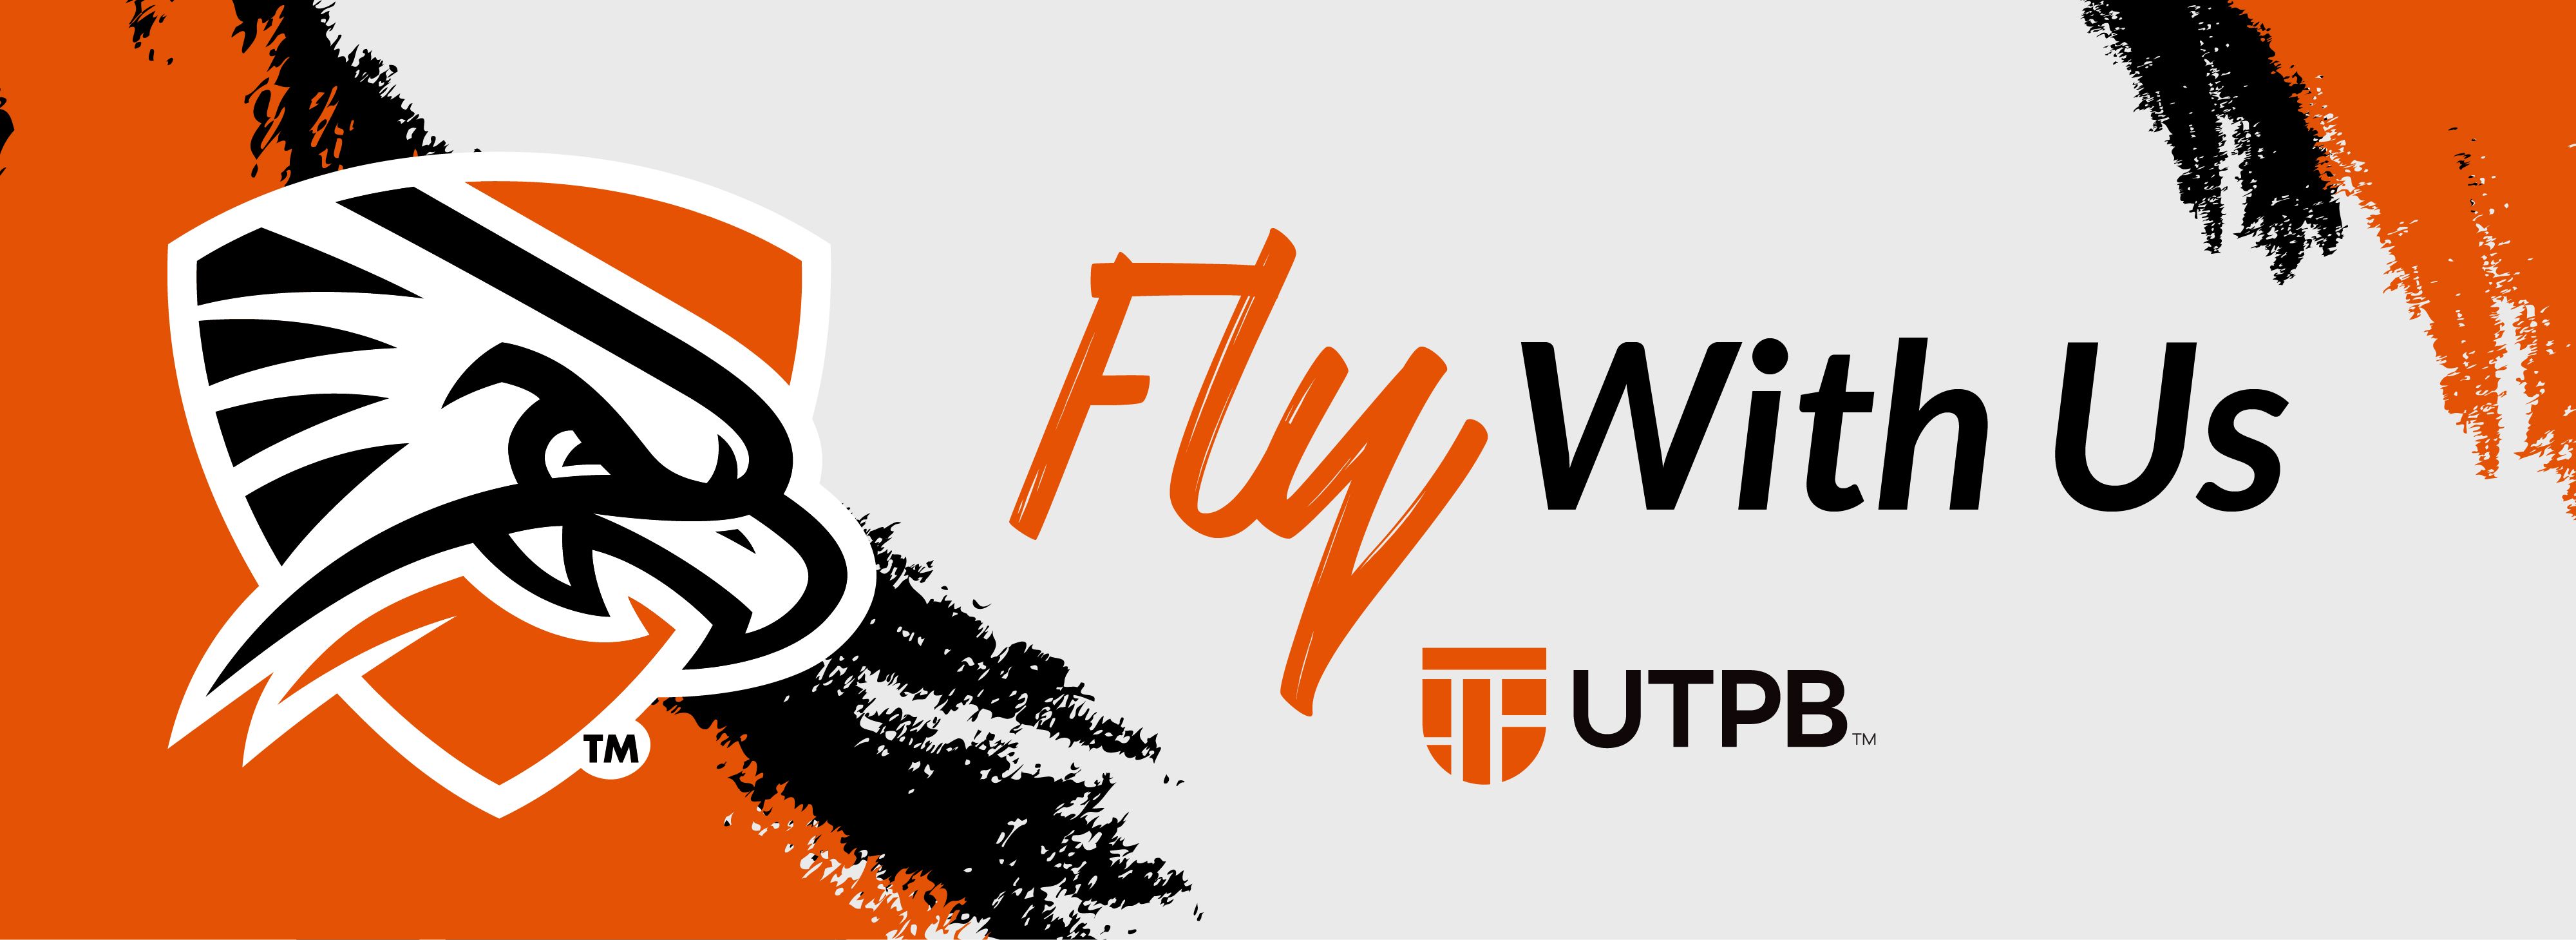 "Fly with Us" banner with Falcon Shield logo